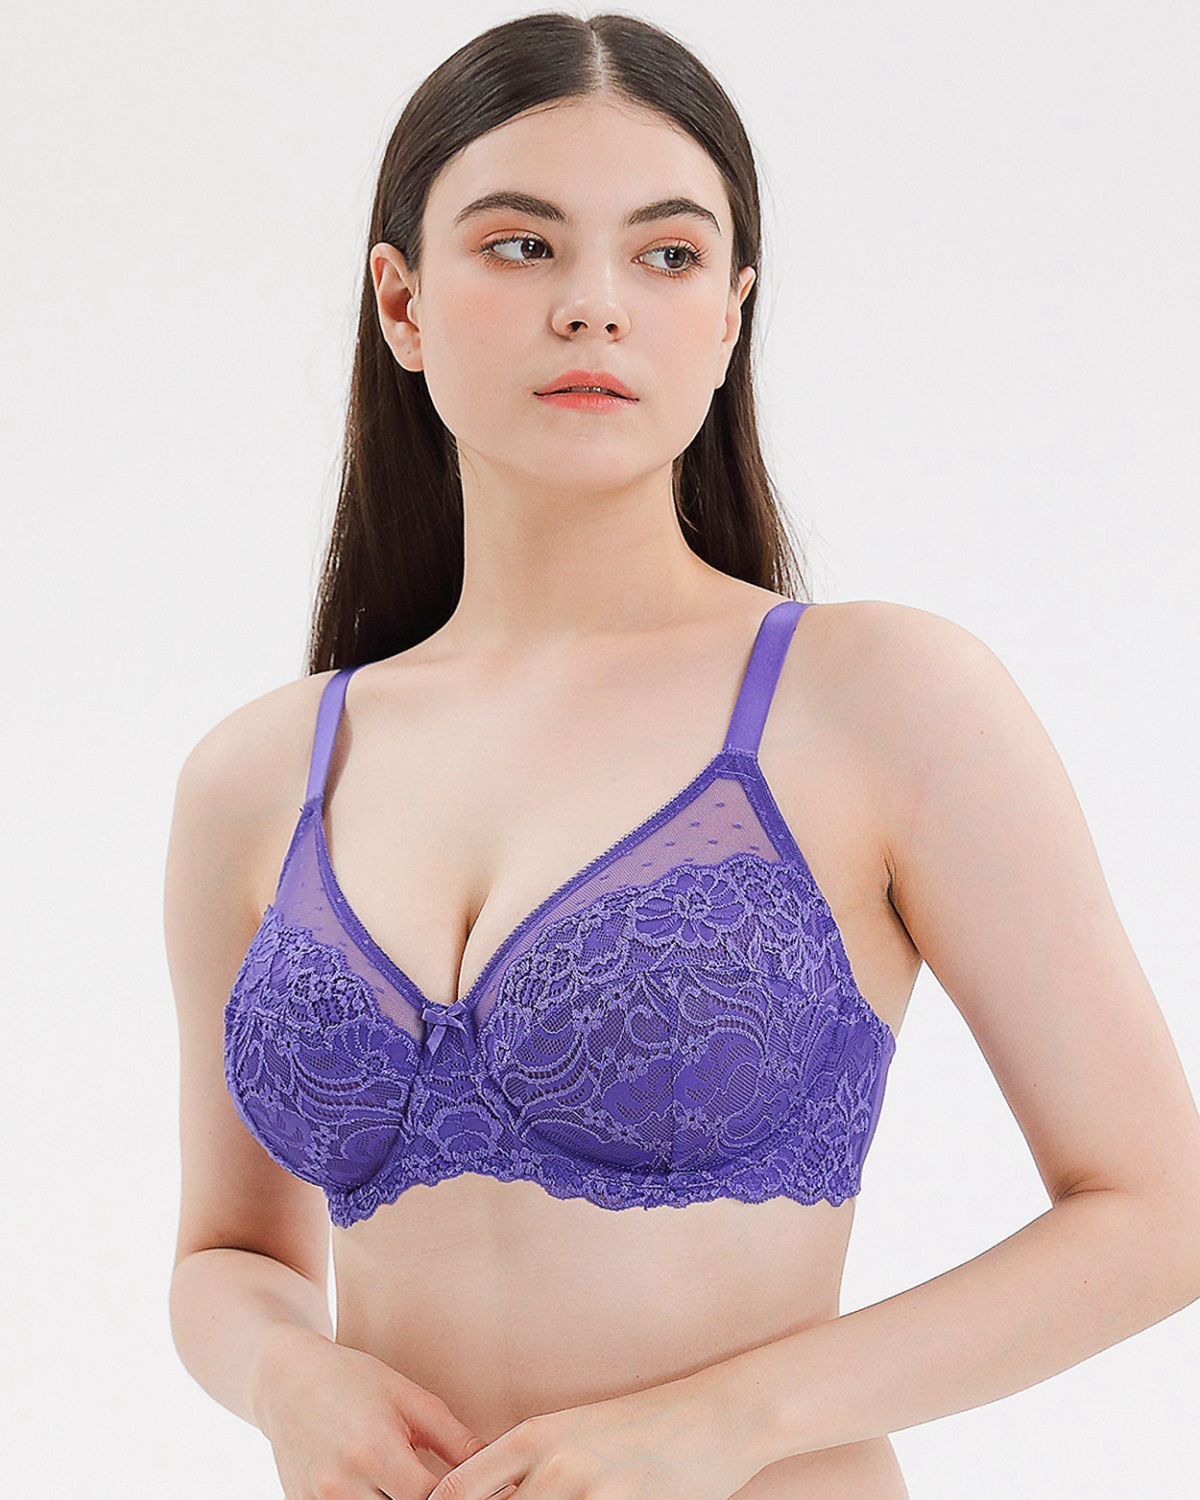 Embroidery Floral Mesh Full Cup Bra